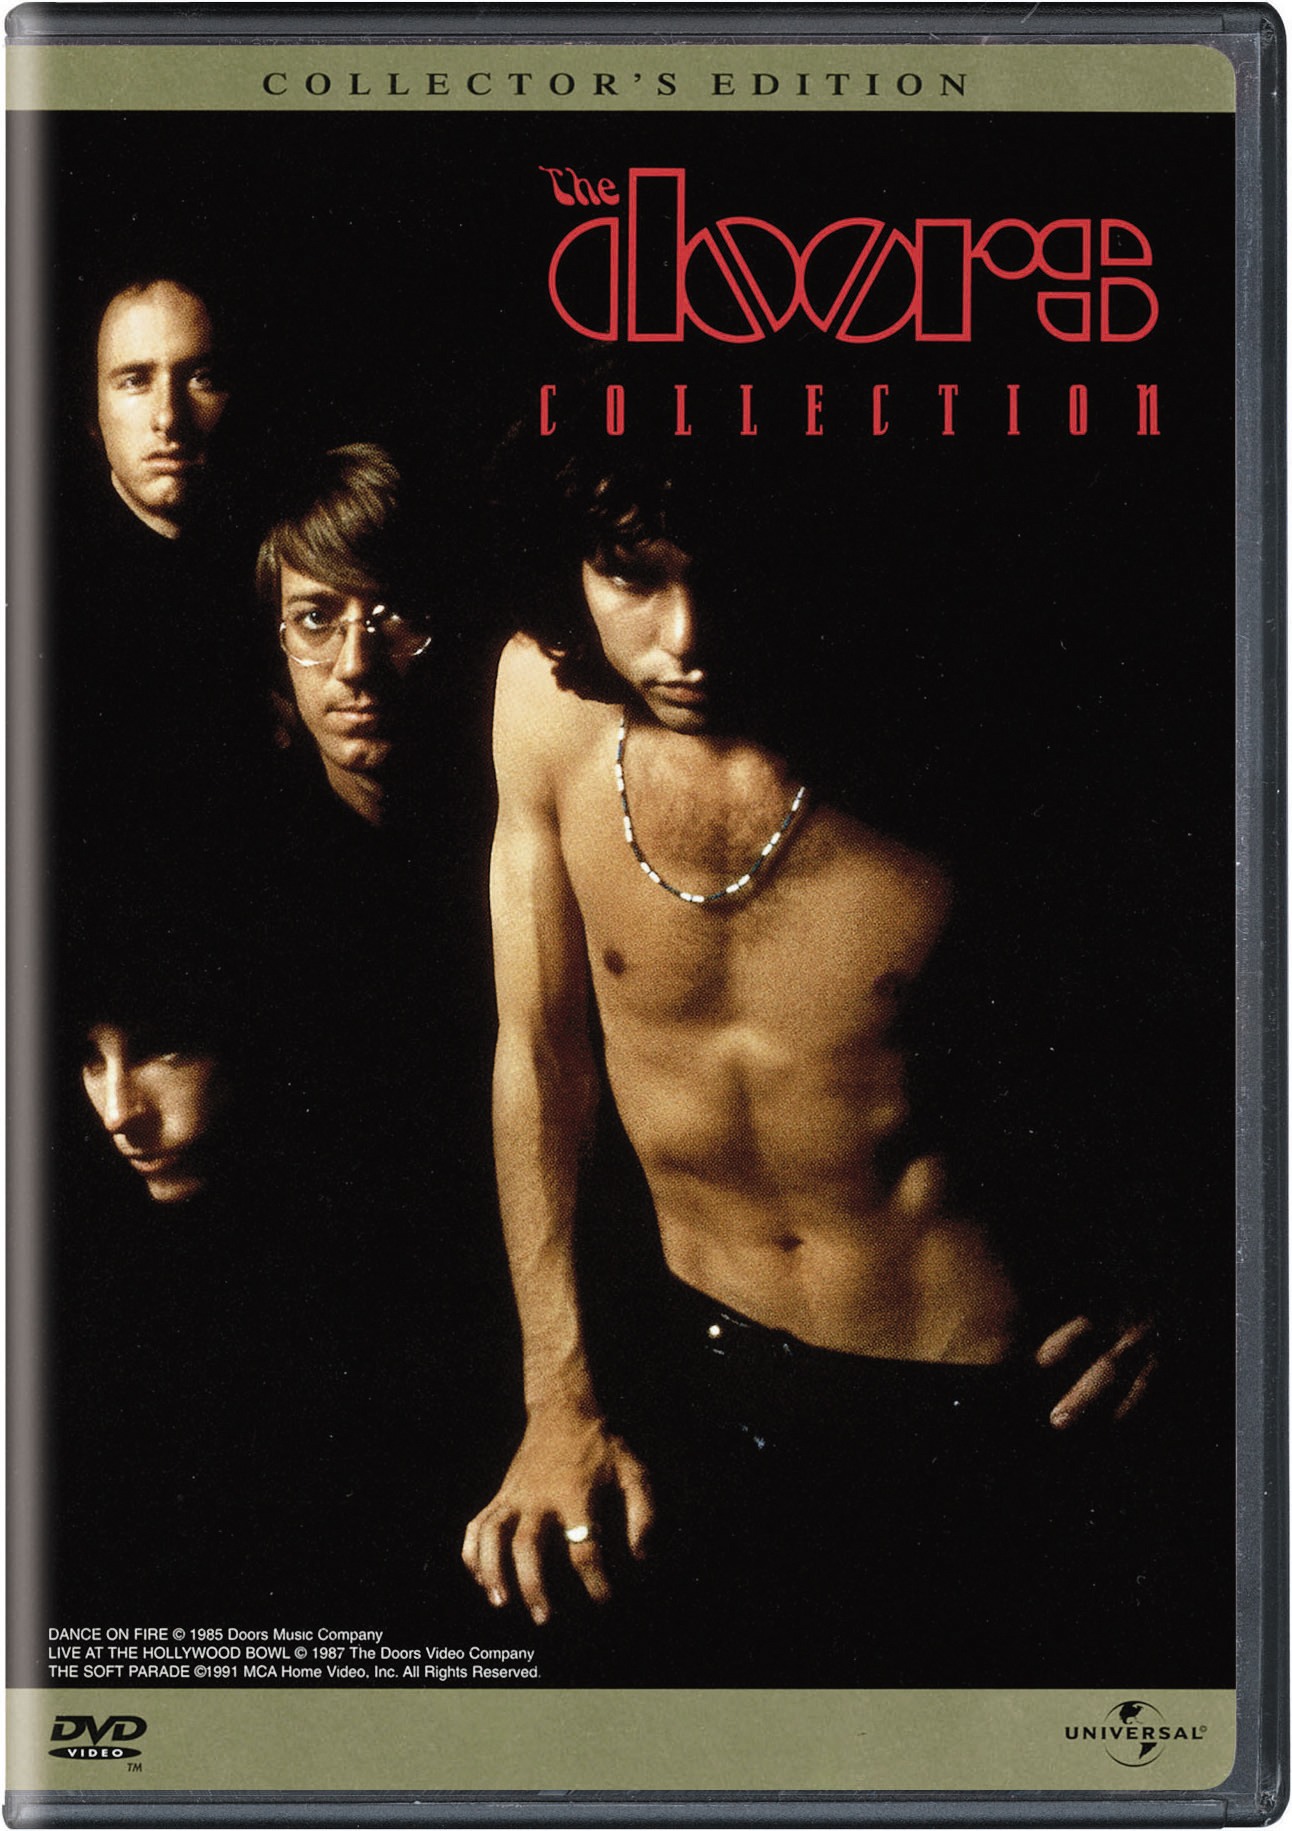 The Doors Collection (Collector's Edition) - DVD   - Rock/Pop Music On DVD